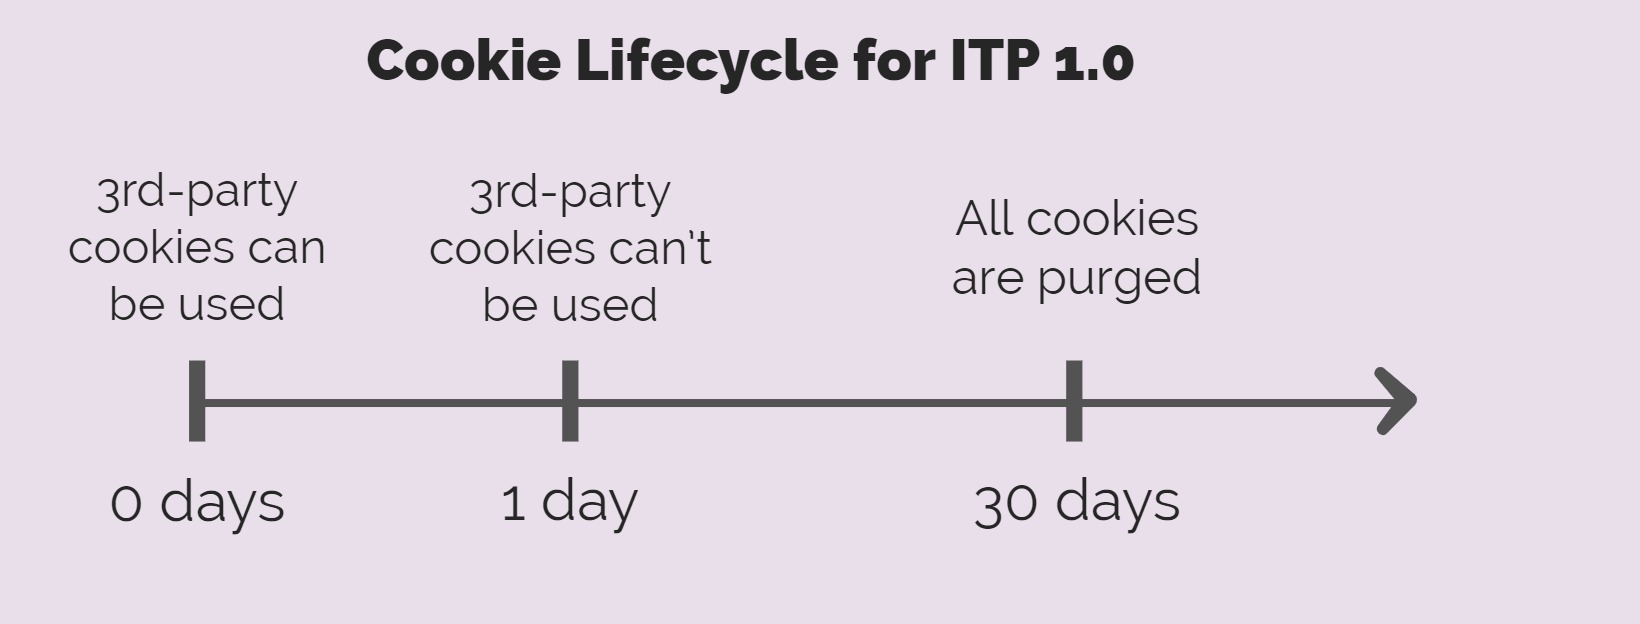 Apple ITP 1.0 cookie lifecylce